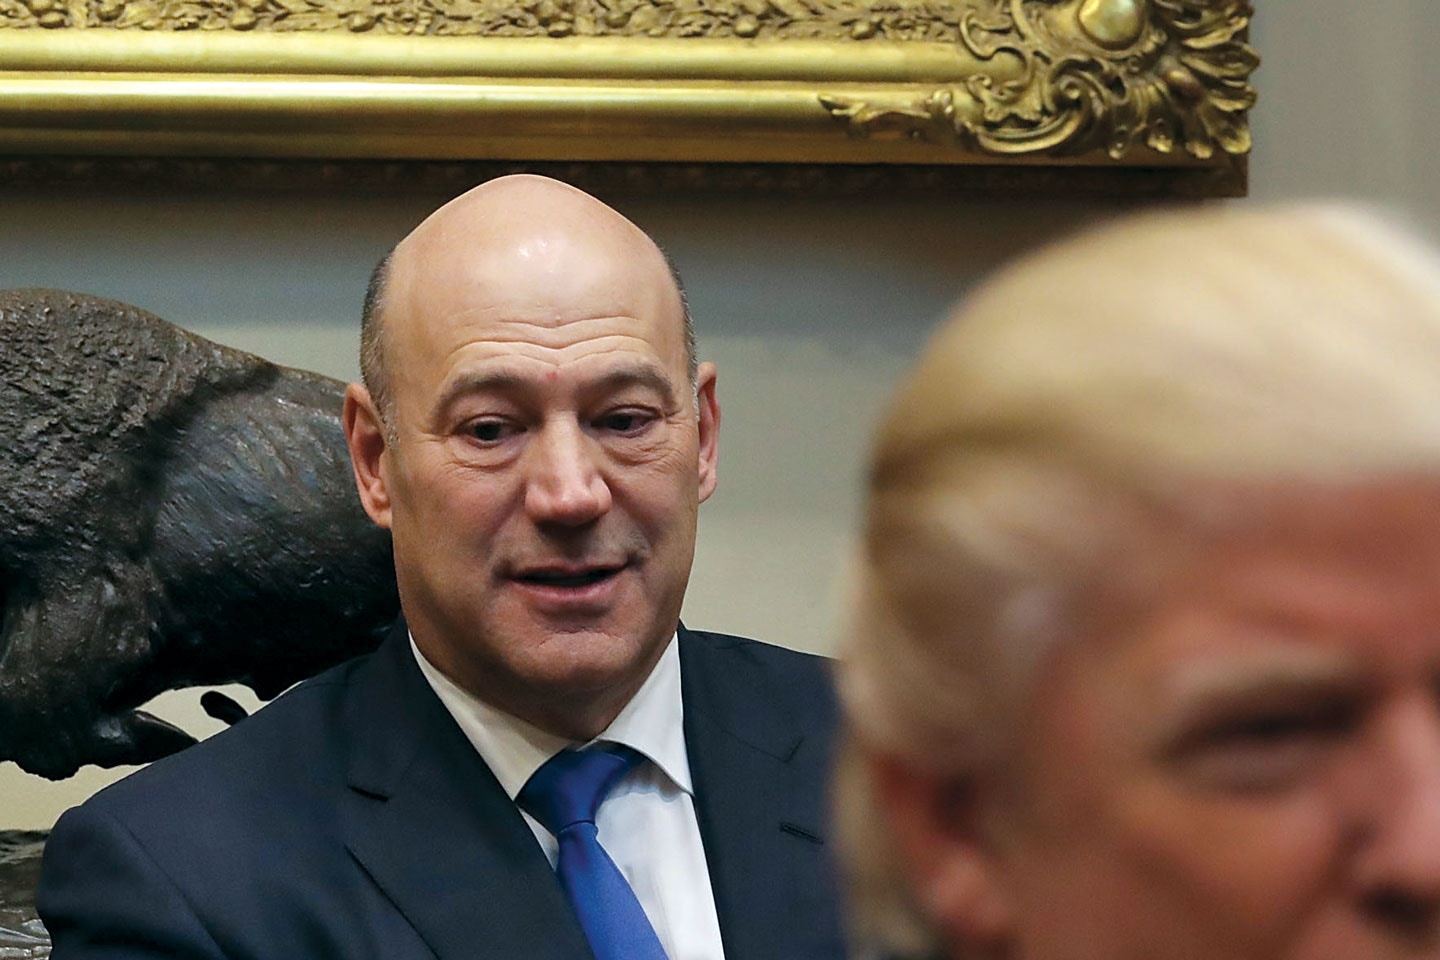 WASHINGTON, DC - JANUARY 23:  Director of the National Economic Council Gary Cohn (L) and Senior Advisor Jared Kushner (R) listen to U.S. President Donald Trump deliver opening remarks during a meeting with business leaders in the Roosevelt Room at the White House January 23, 2017 in Washington, DC. Business leaders included Elon Musk of SpaceX, Mark Sutton of International Paper, Andrew Liveris of Dow Chemical, Mario Longhi of US Steel, Marillyn Hewson of Lockheed Martin, Wendell Weeks of Corning, Alex Gorsky of Johnson & Johnson, Michael Dell of Dell Technologies and others.  (Photo by Chip Somodevilla/Getty Images)